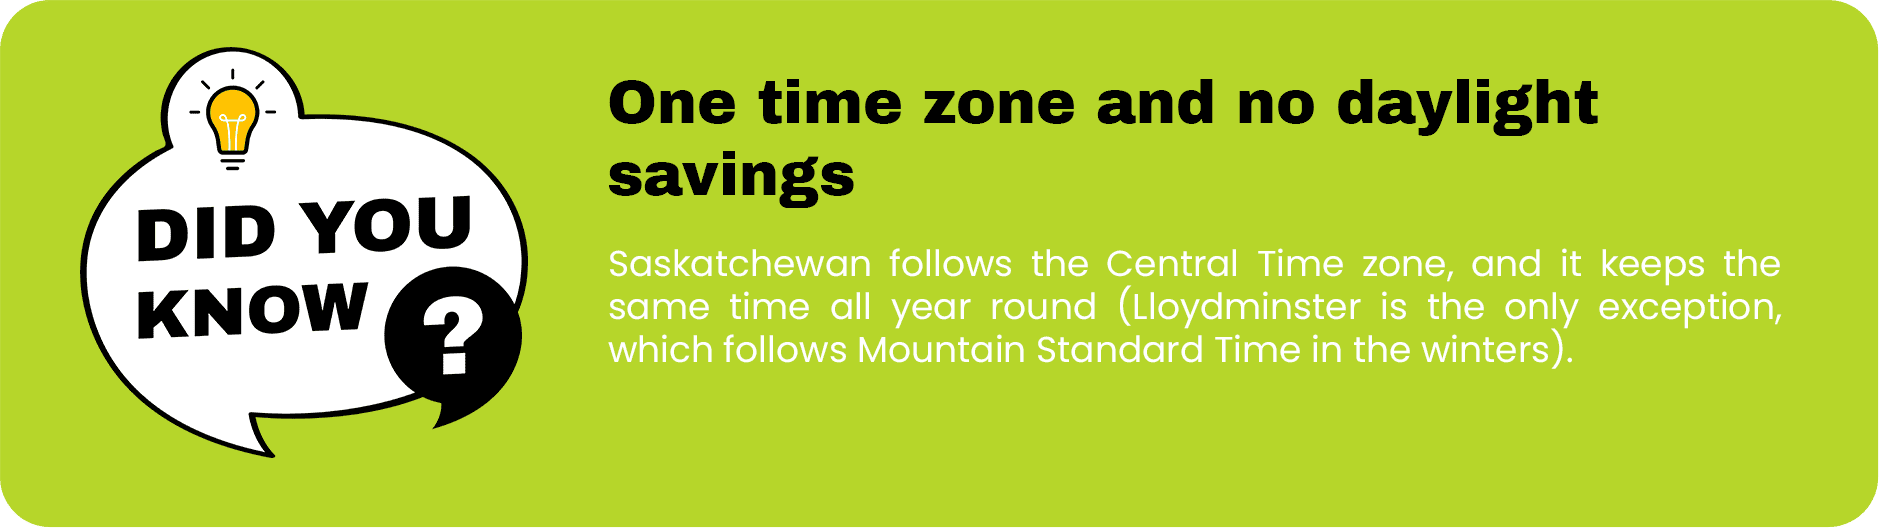 Informative graphic about Saskatchewan's preferred time zone policy with a "did you know?" trivia bubble.